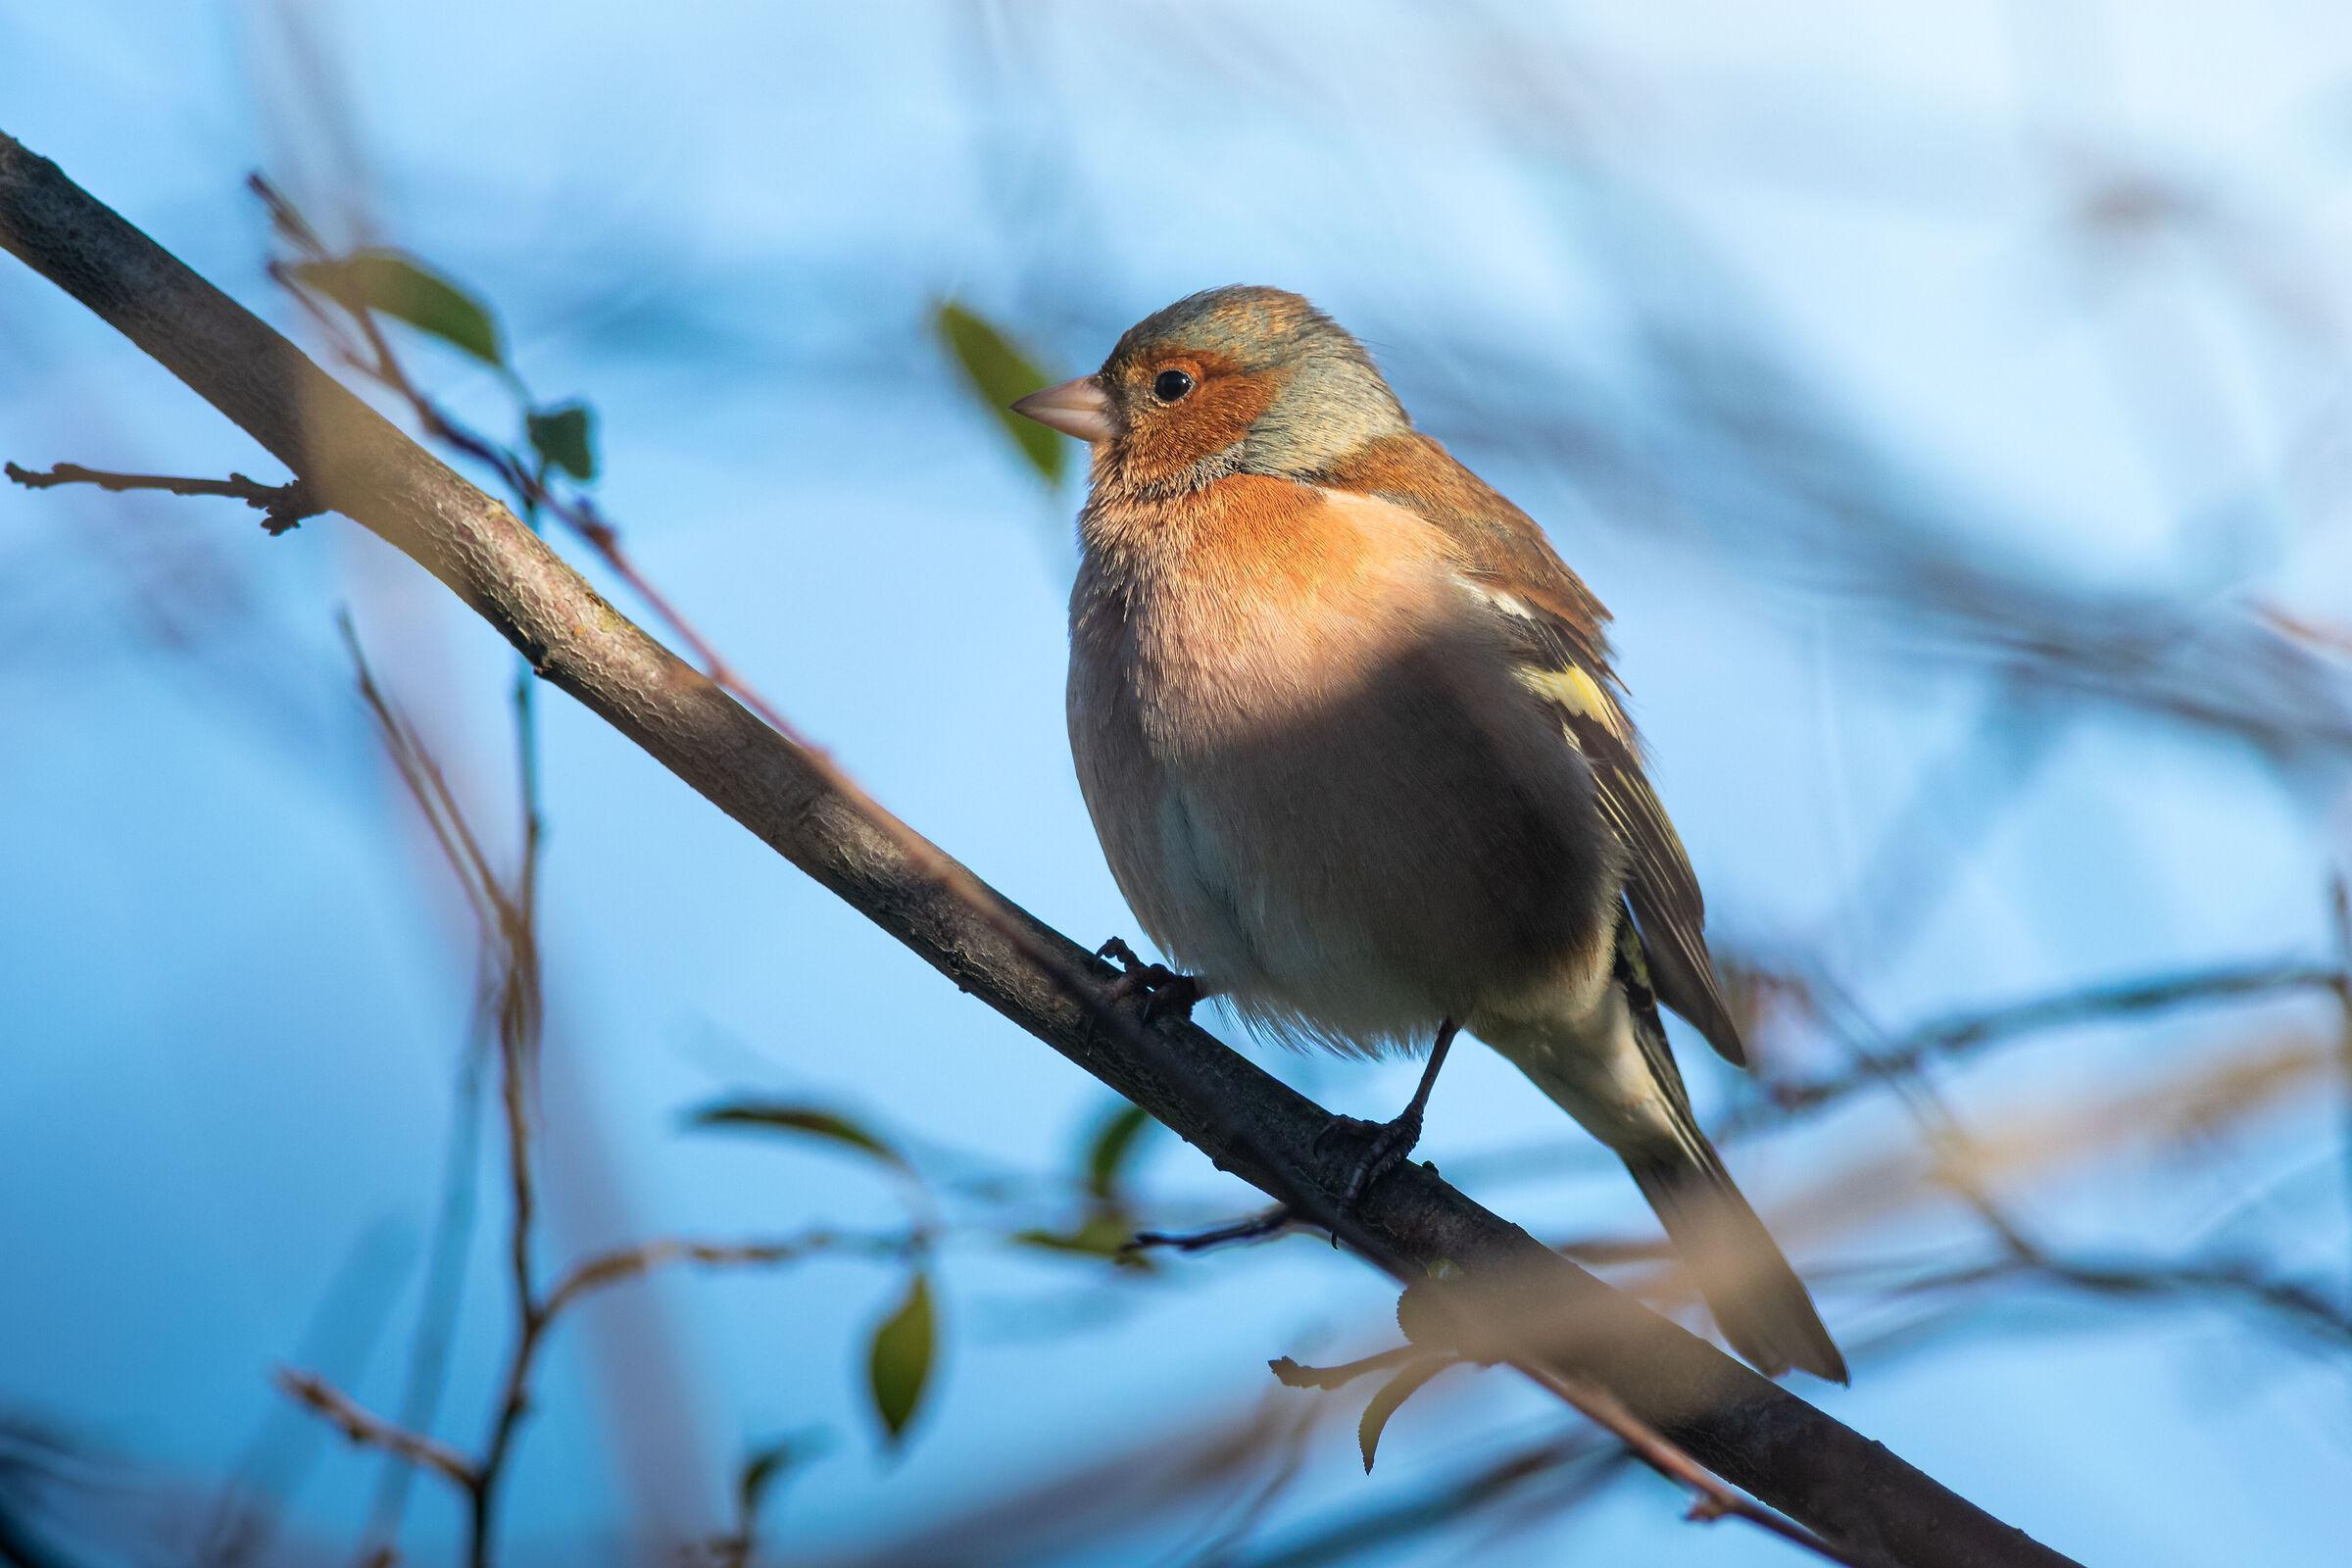 The awakening of the Chaffinch ...